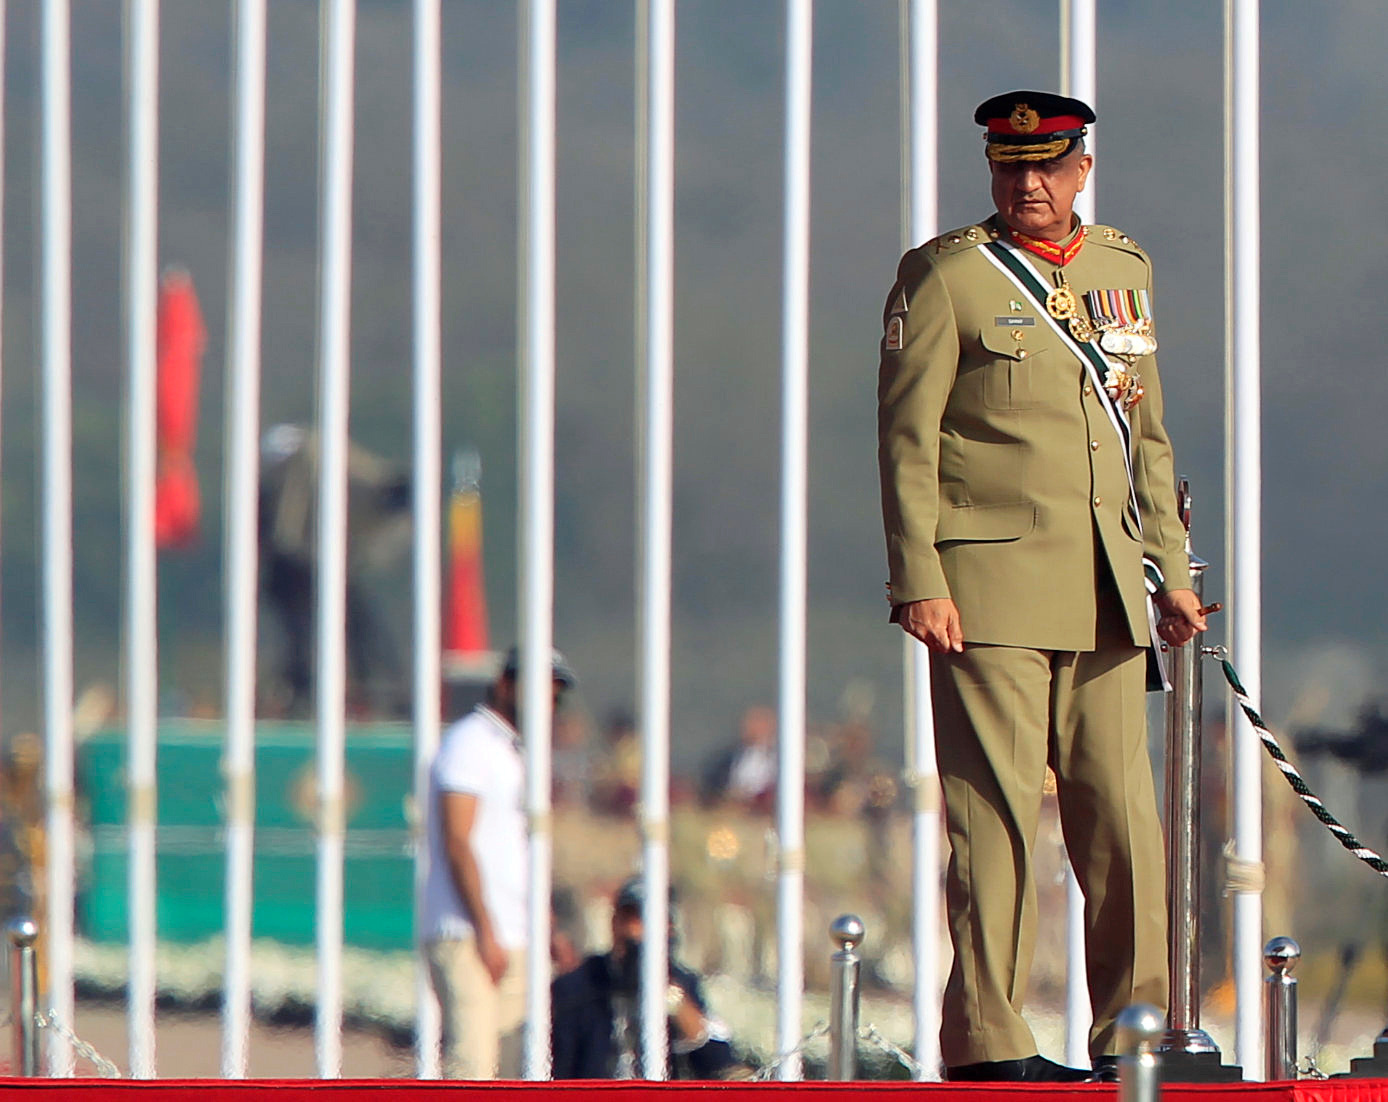 Pakistan's Army Chief of Staff General Qamar Javed Bajwa arrives to attend the Pakistan Day military parade in Islamabad's Army Chief of Staff General Qamar Javed Bajwa arrives to attend the Pakistan Day military parade in Islamabad